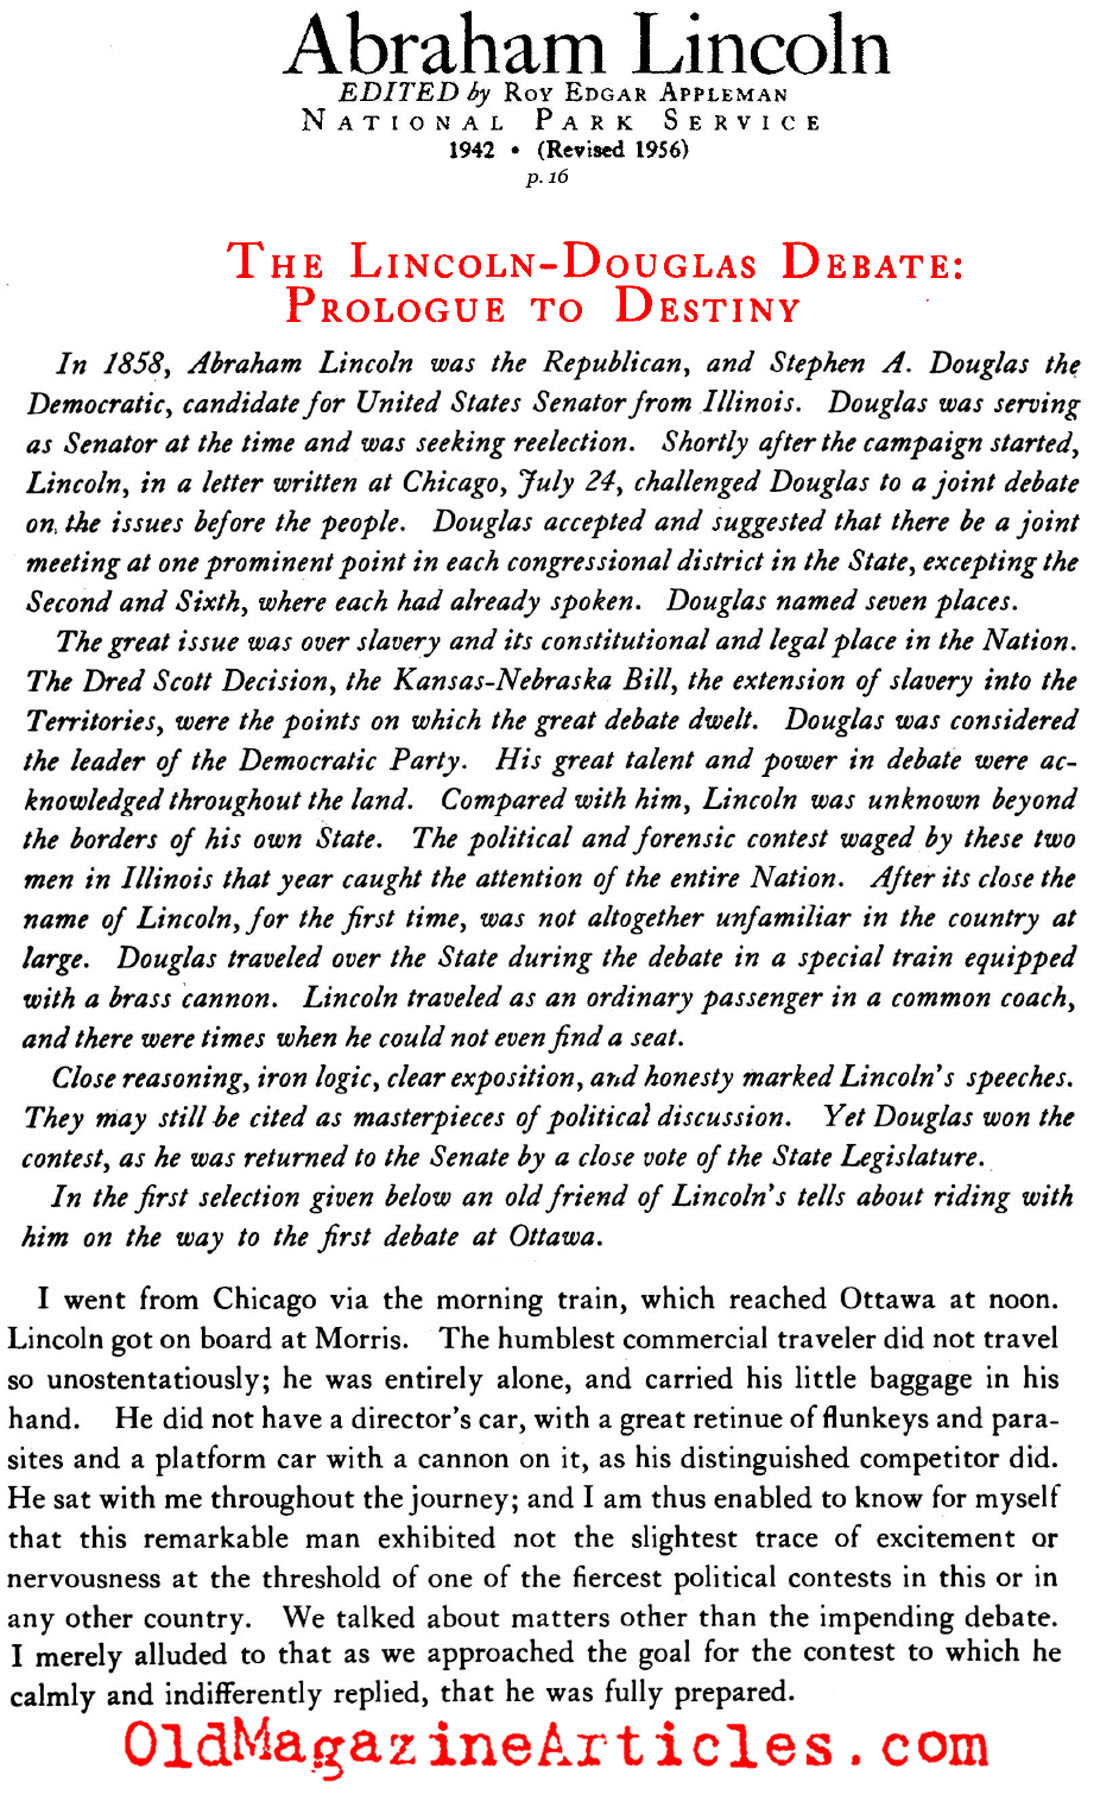 Traveling to the Lincoln - Douglas Debate (National Park Service, 1956)